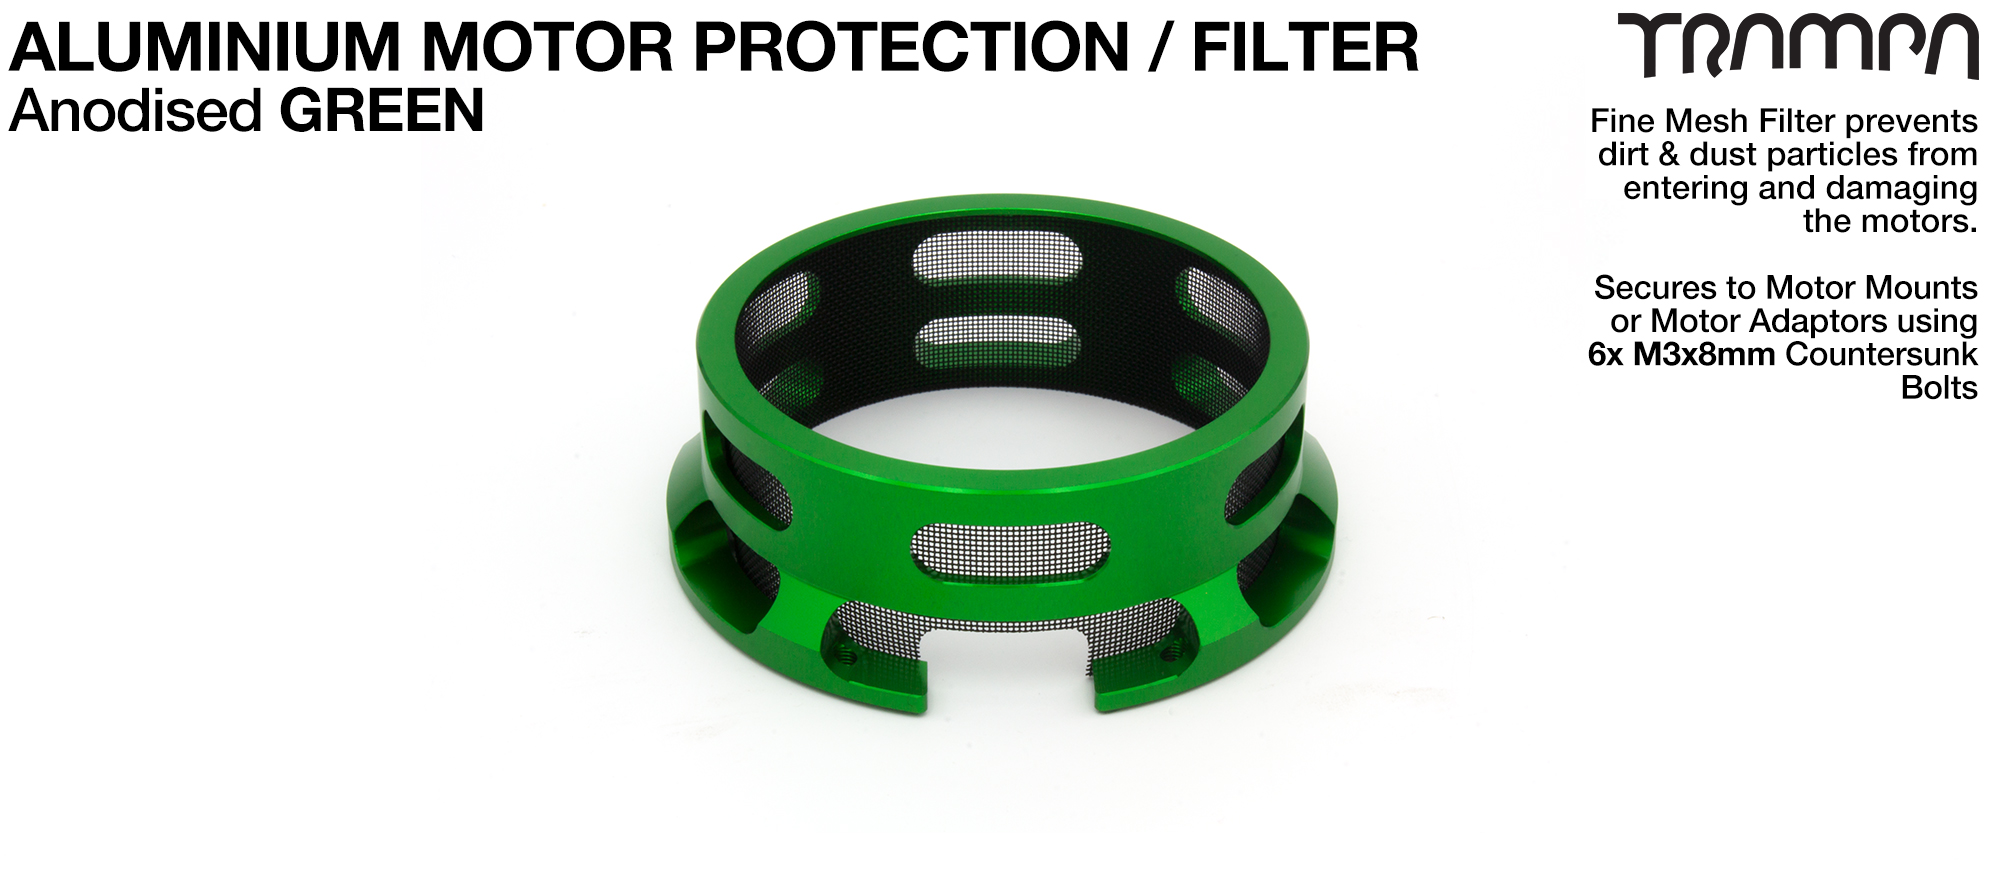 HALF CAGE Motor protection Housing - GREEN 